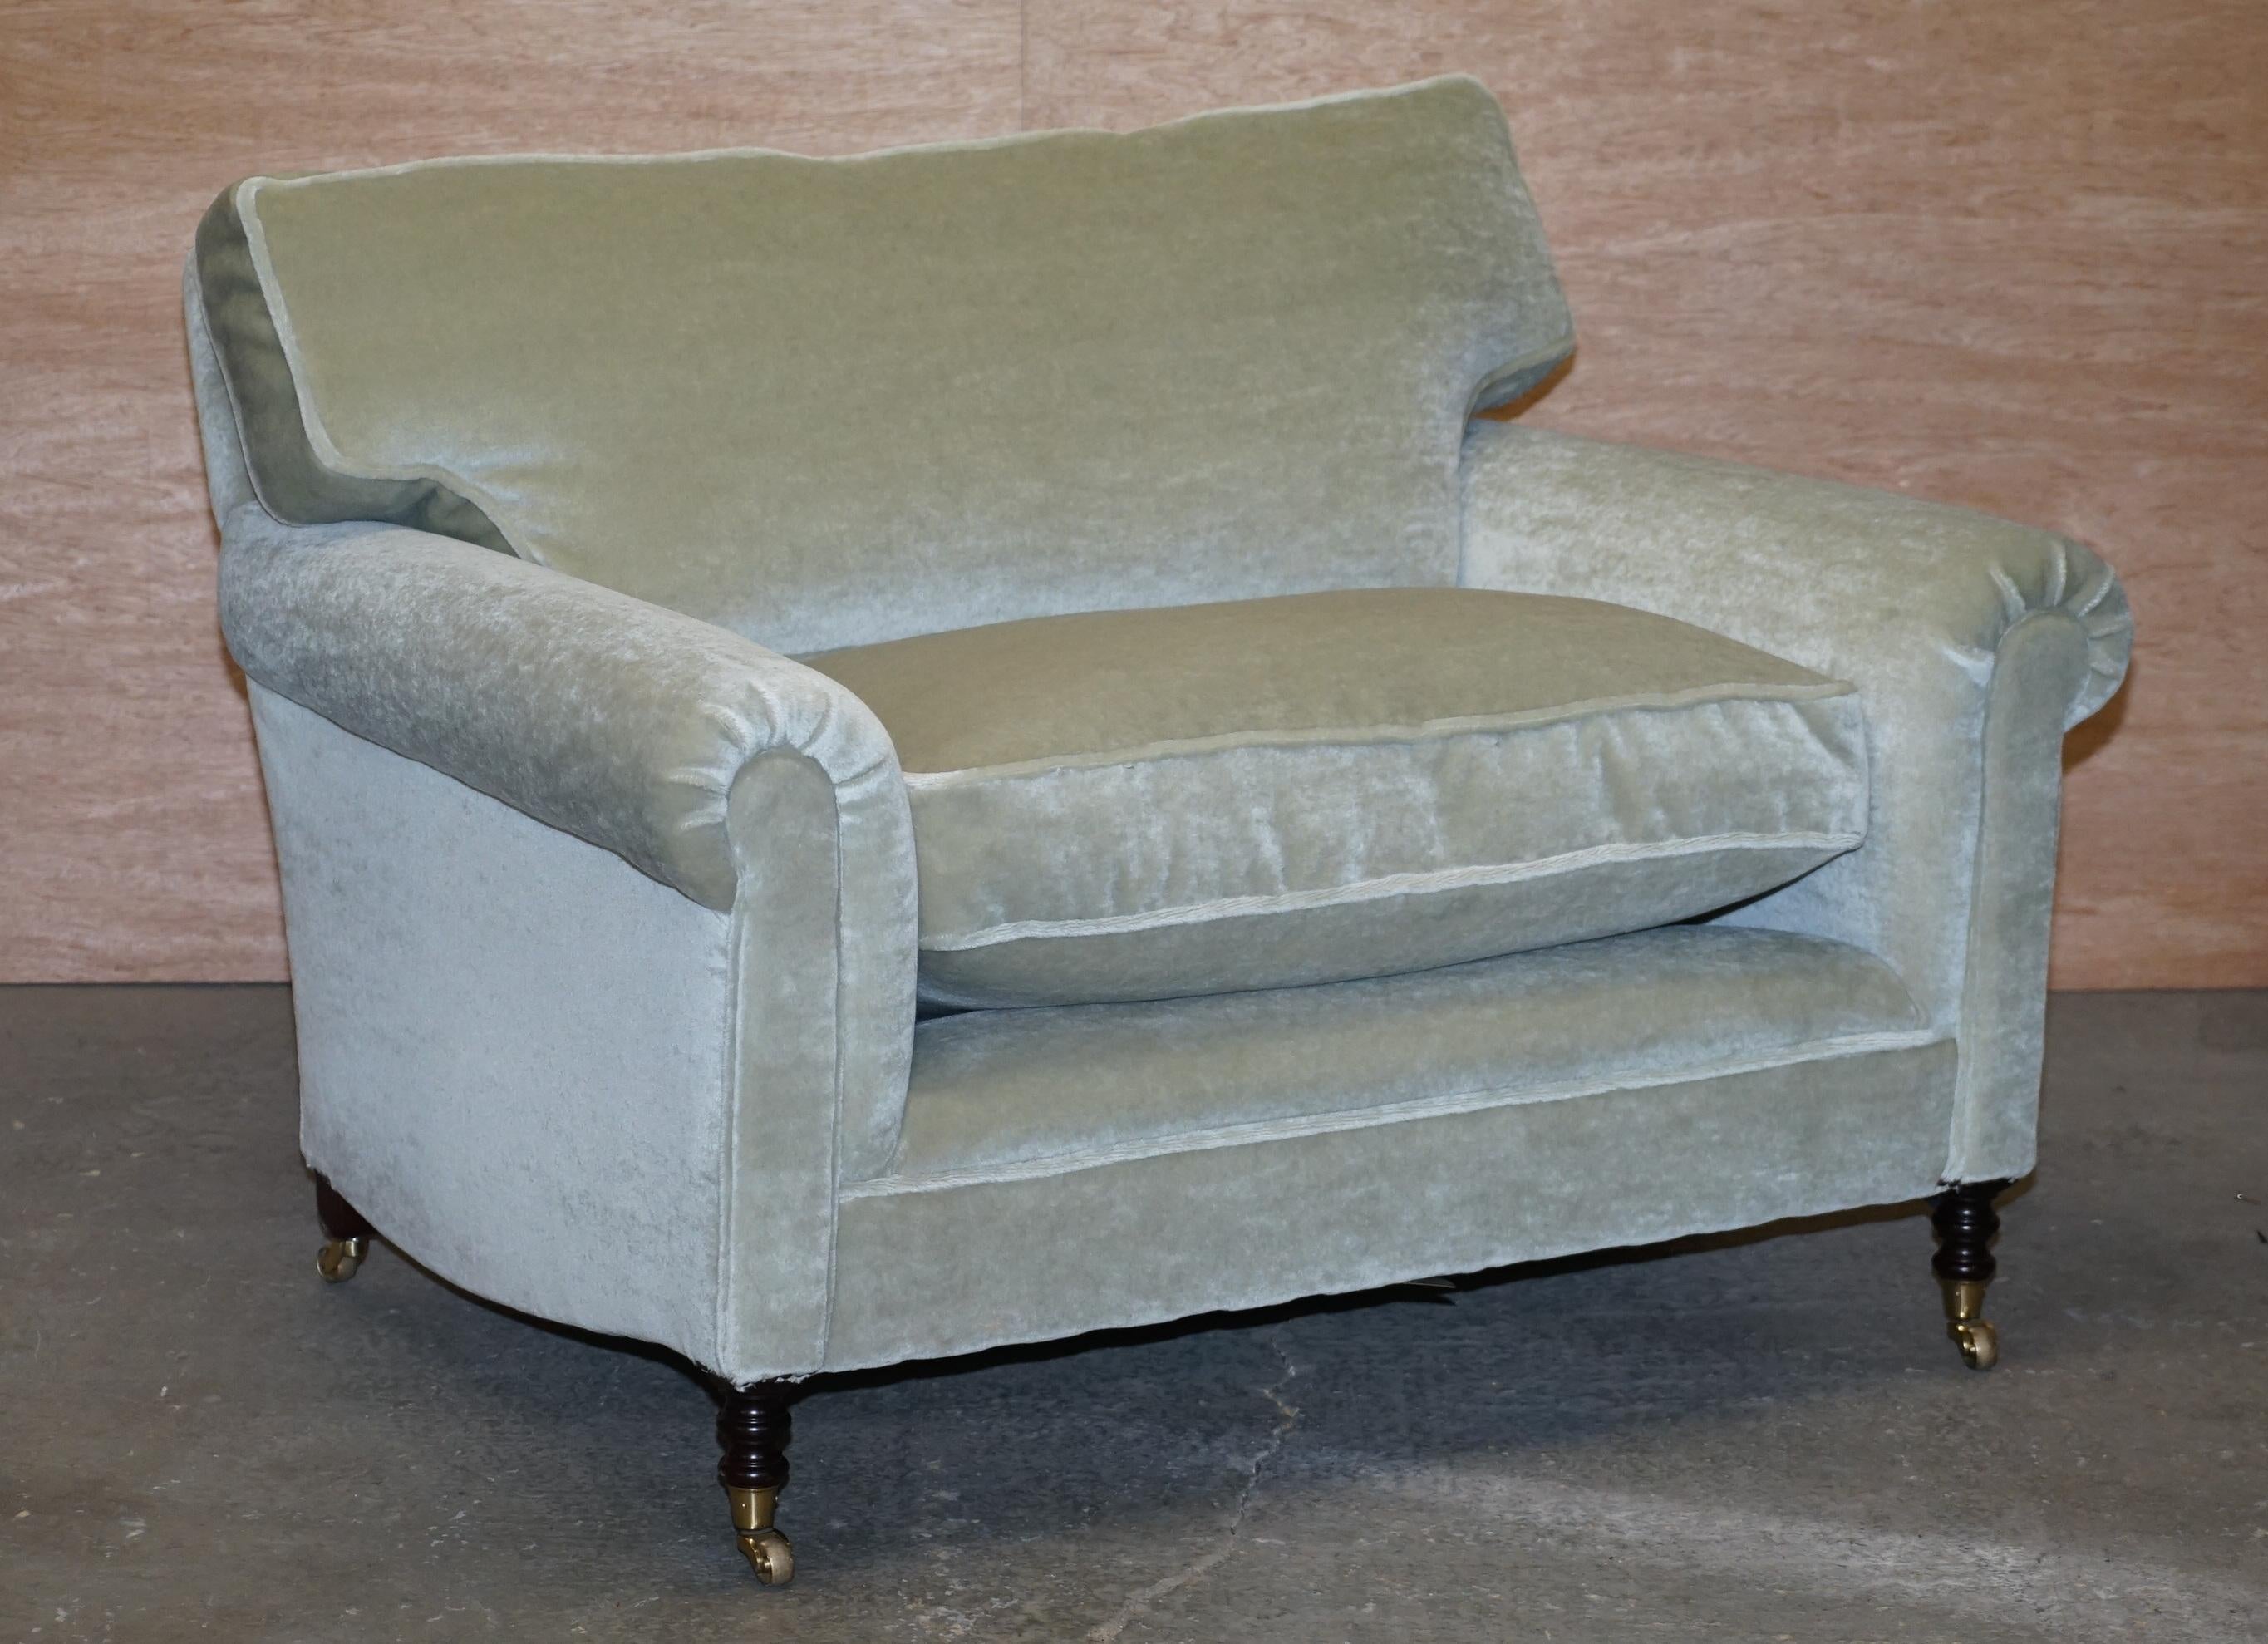 Wimbledon-Furniture

Wimbledon-Furniture is delighted to offer for sale this pair of brand new George Smith RRP £17,000 Love seat armchairs upholstered in George Smiths own Mohair Velvet which retails for £389 per sq-mt

Please note the delivery